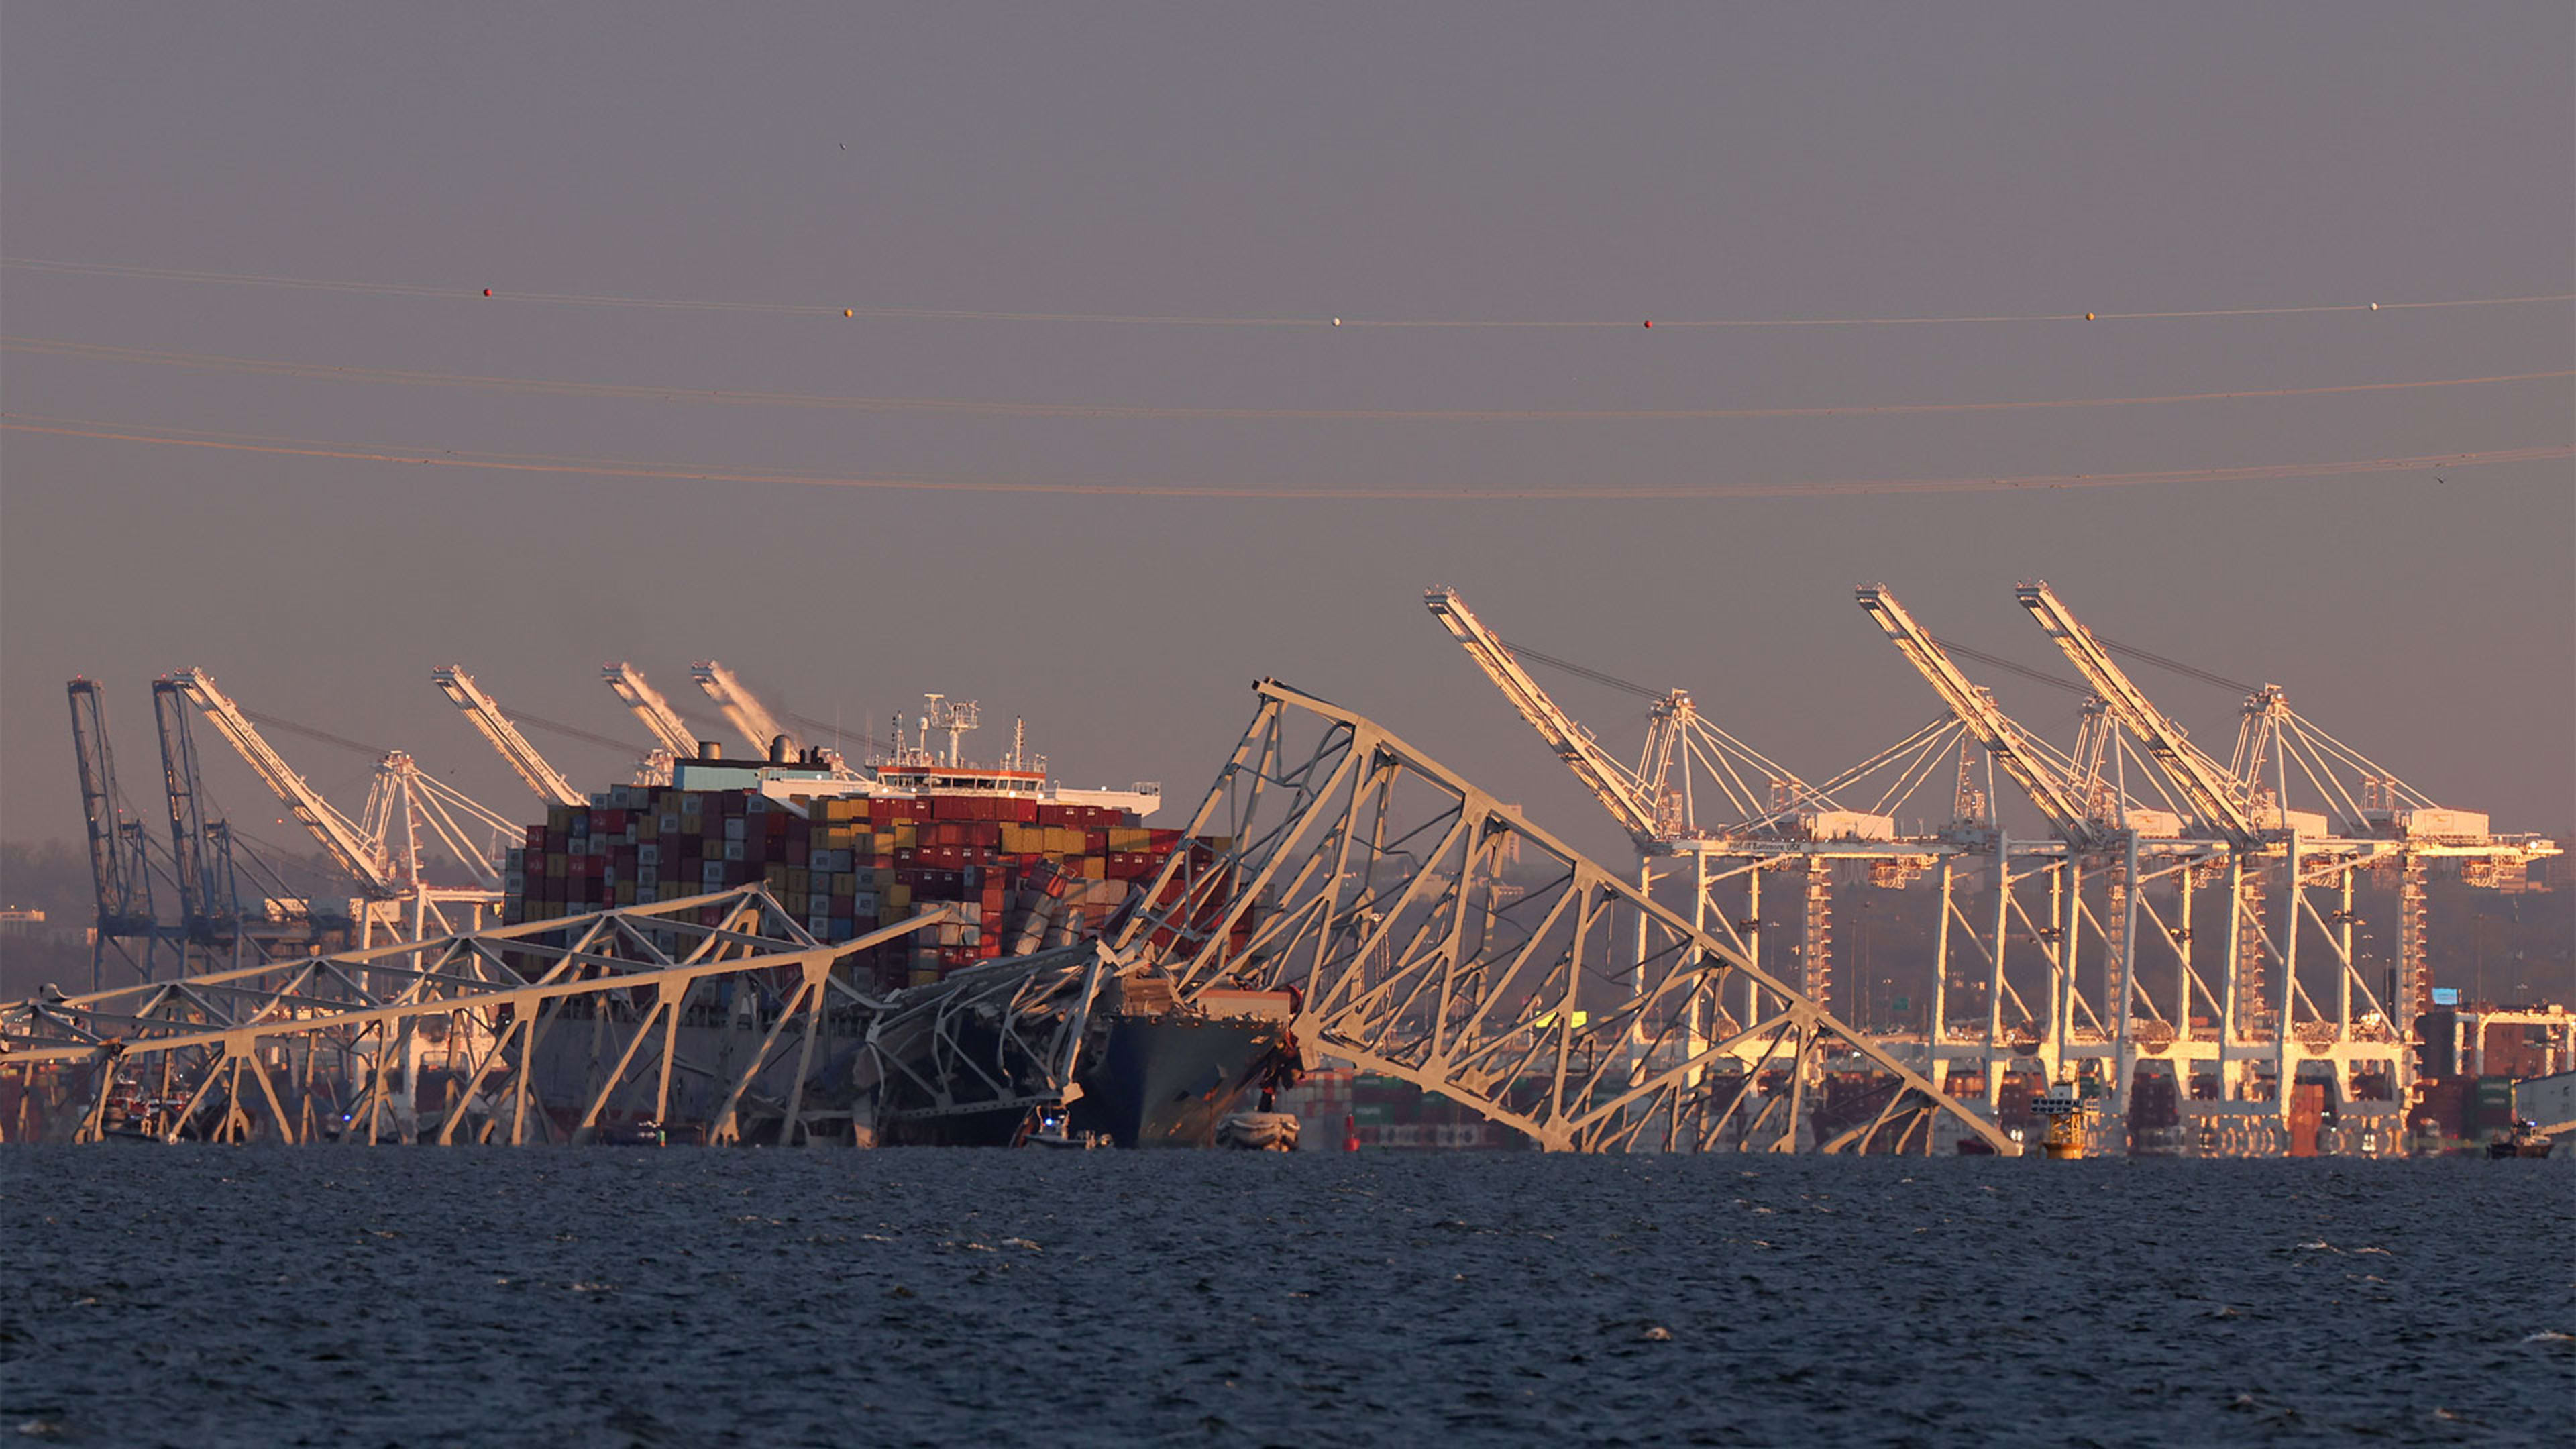 Baltimore Francis Scott Key Bridge collapse: Update on the Dali container ship tragedy